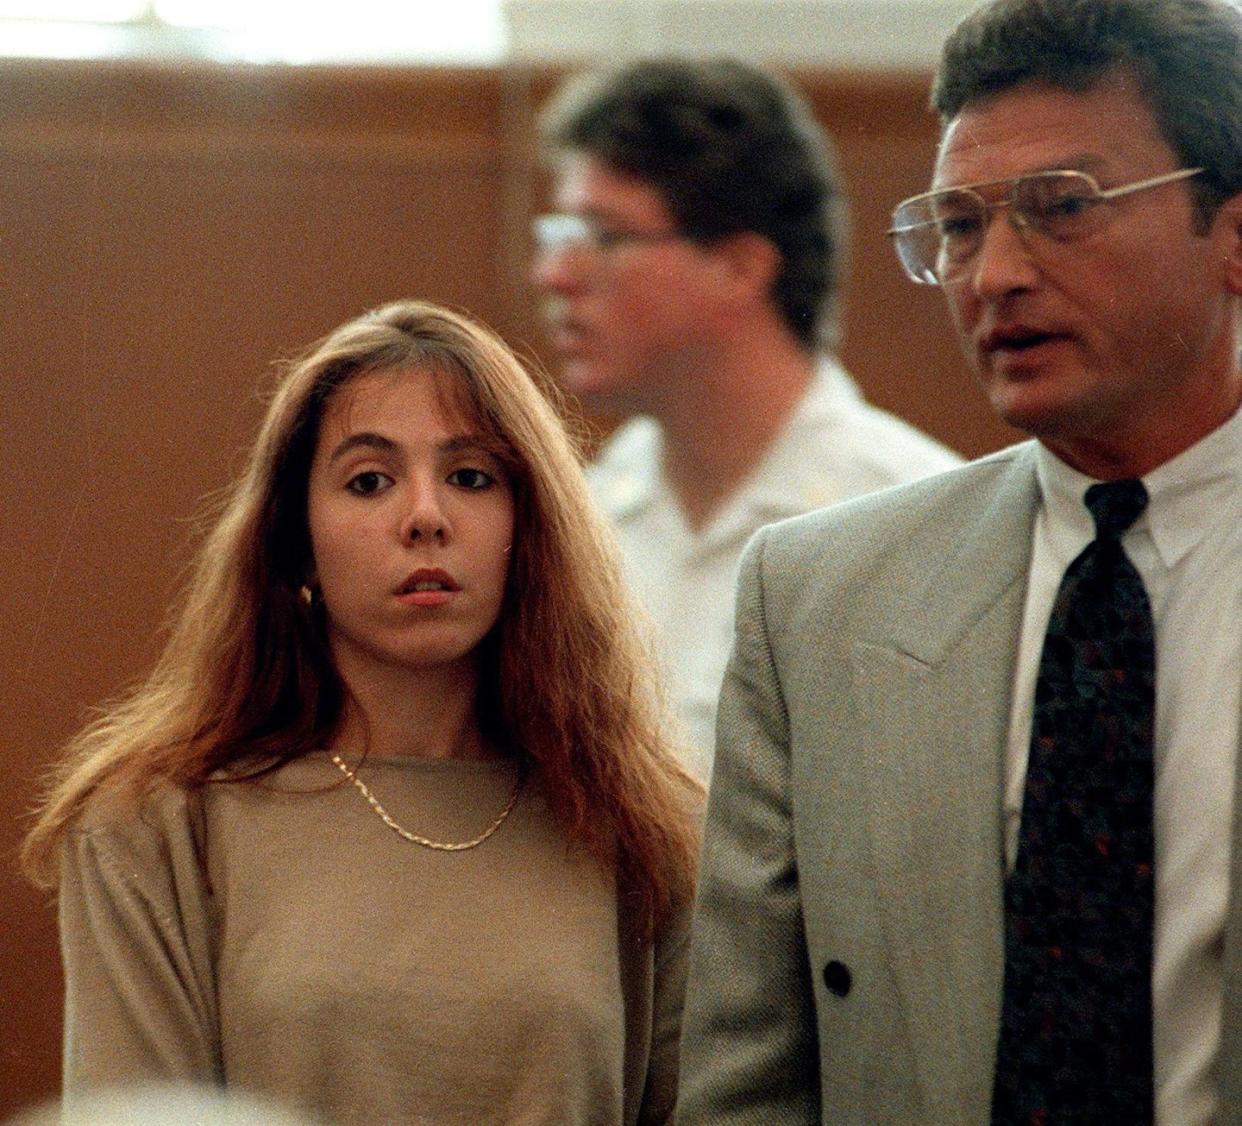 amy fisher in court with her lawyer eric naiburg on long island in 1992